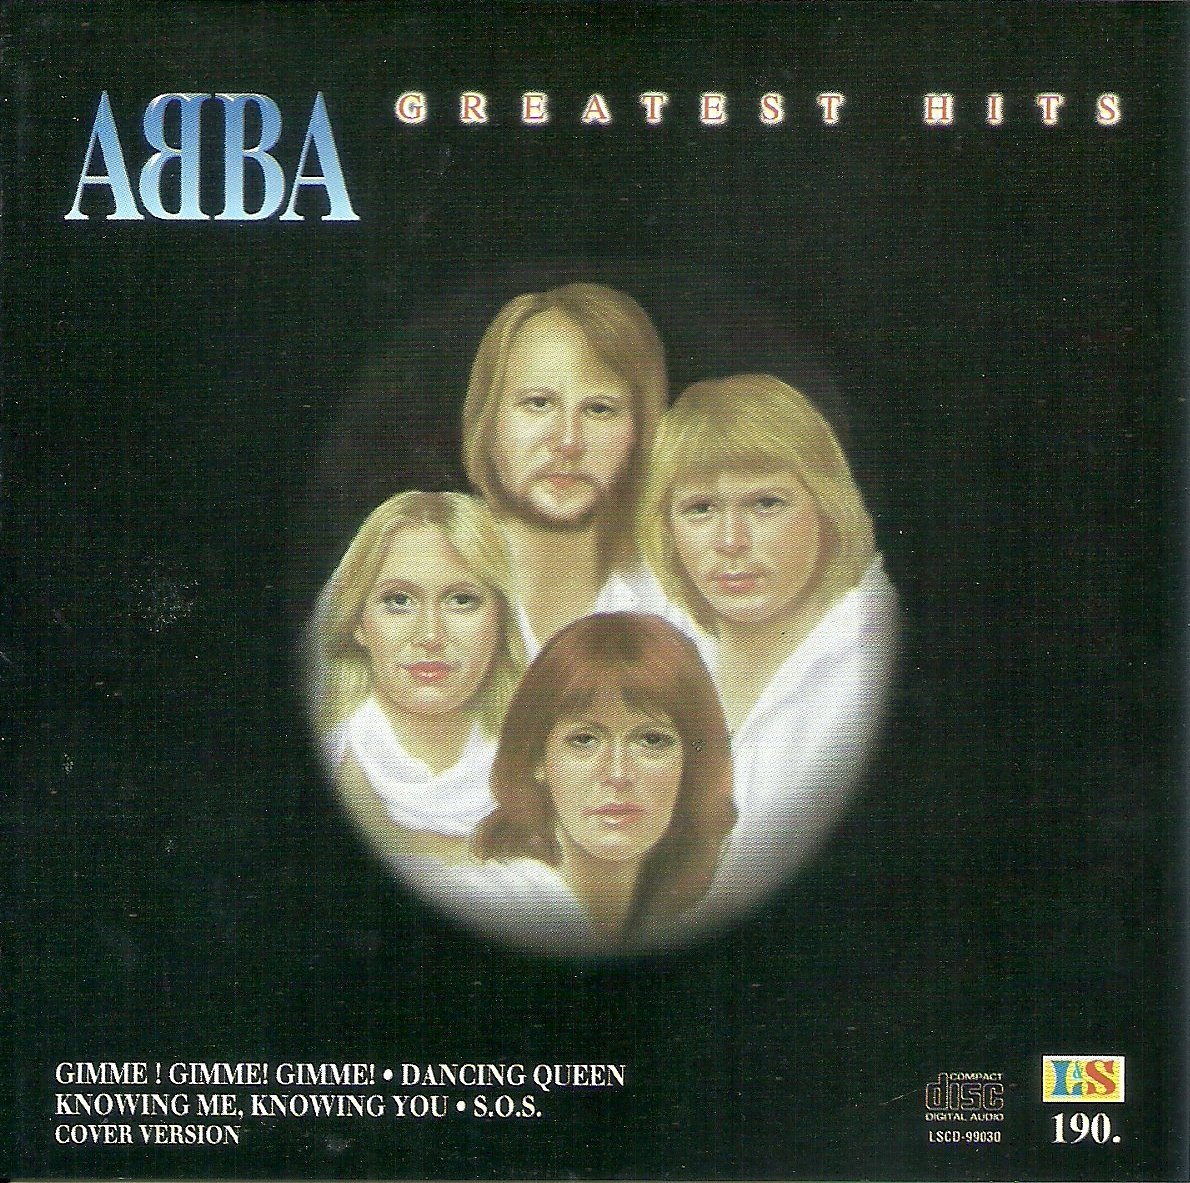 Abba - The Greatest Hits (Cover Version)